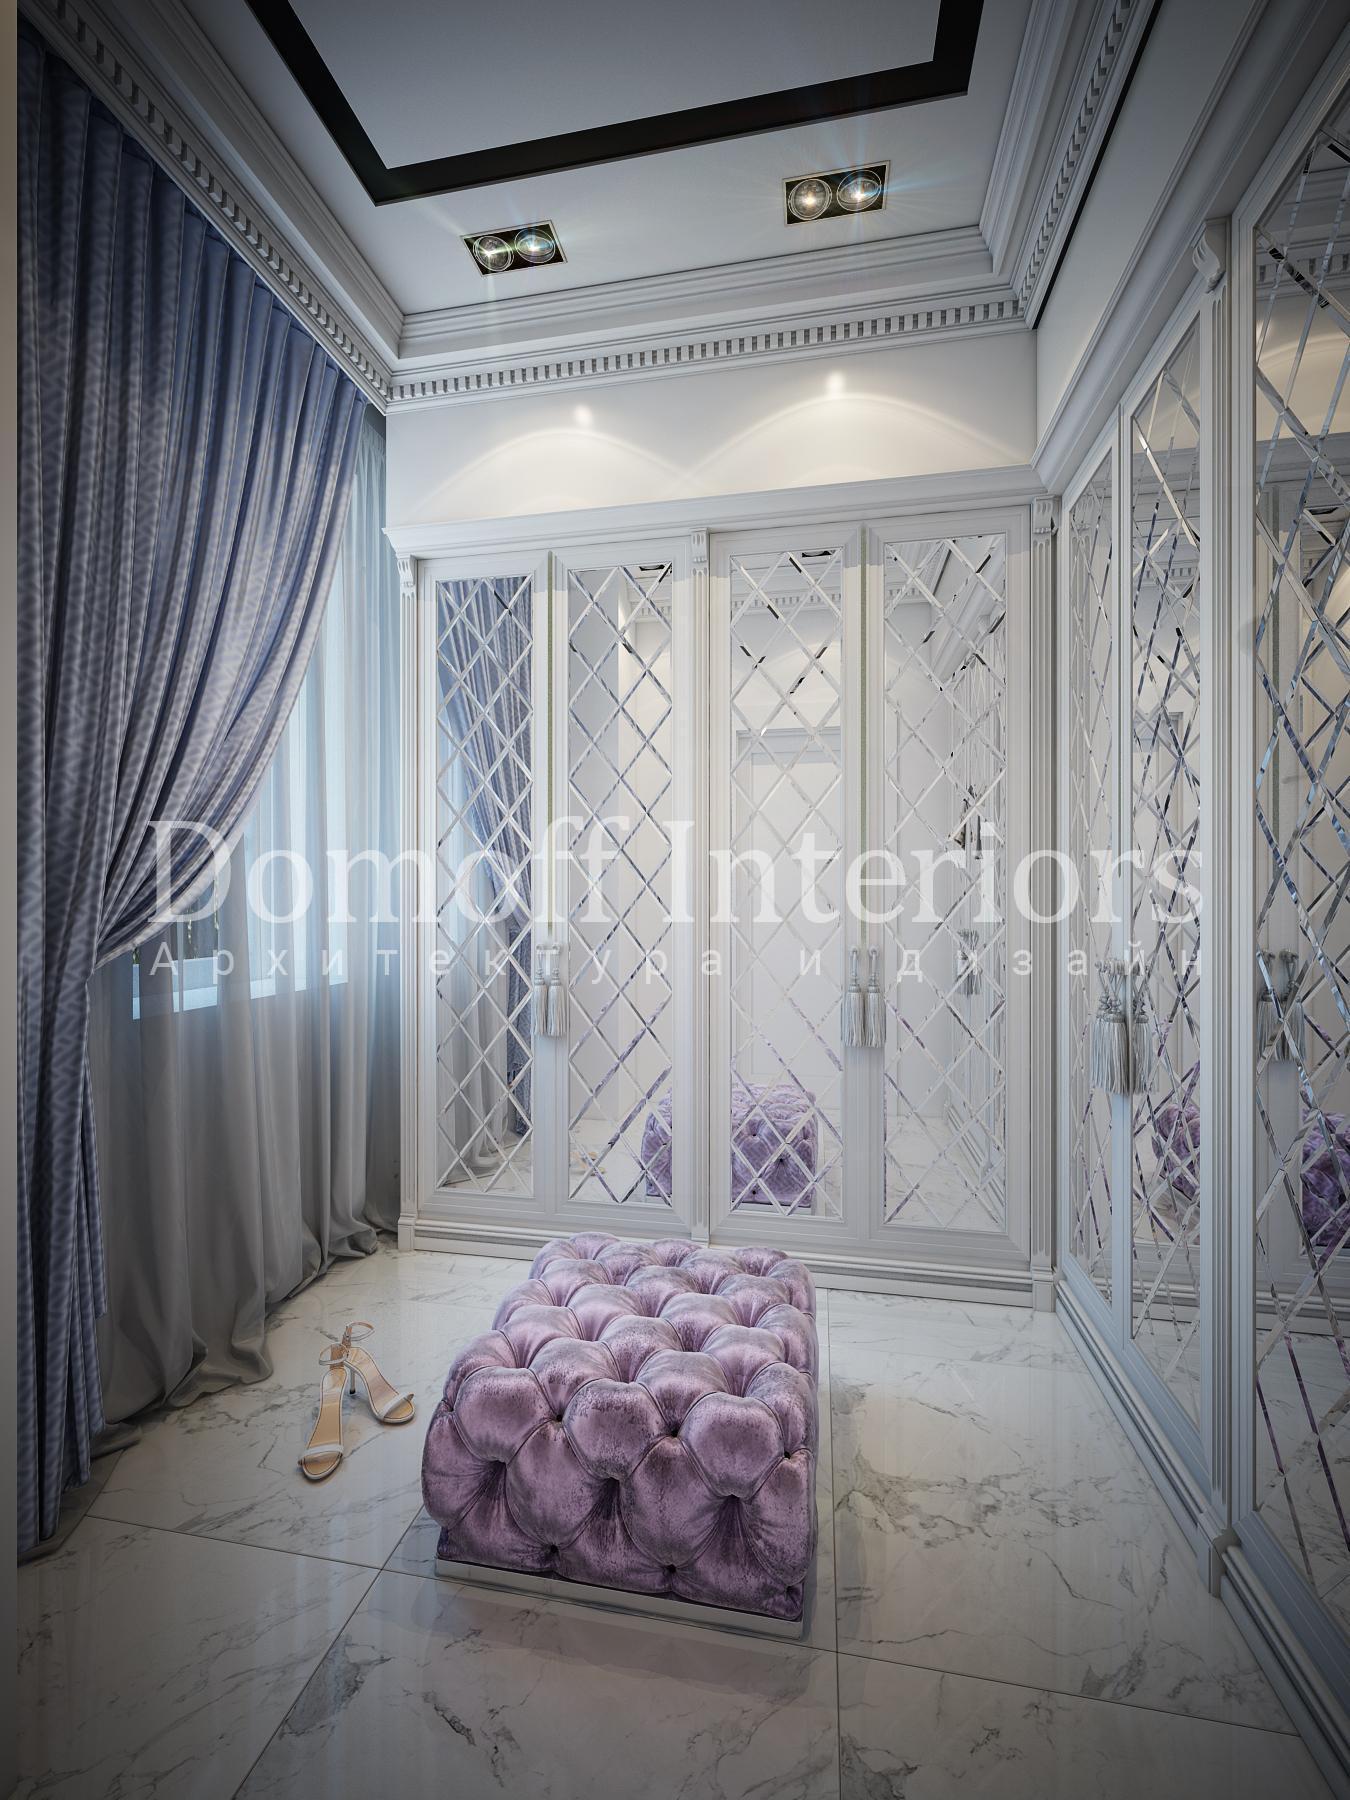 Dressing room No. 1 made in the style of Eclecticism Contemporary classics